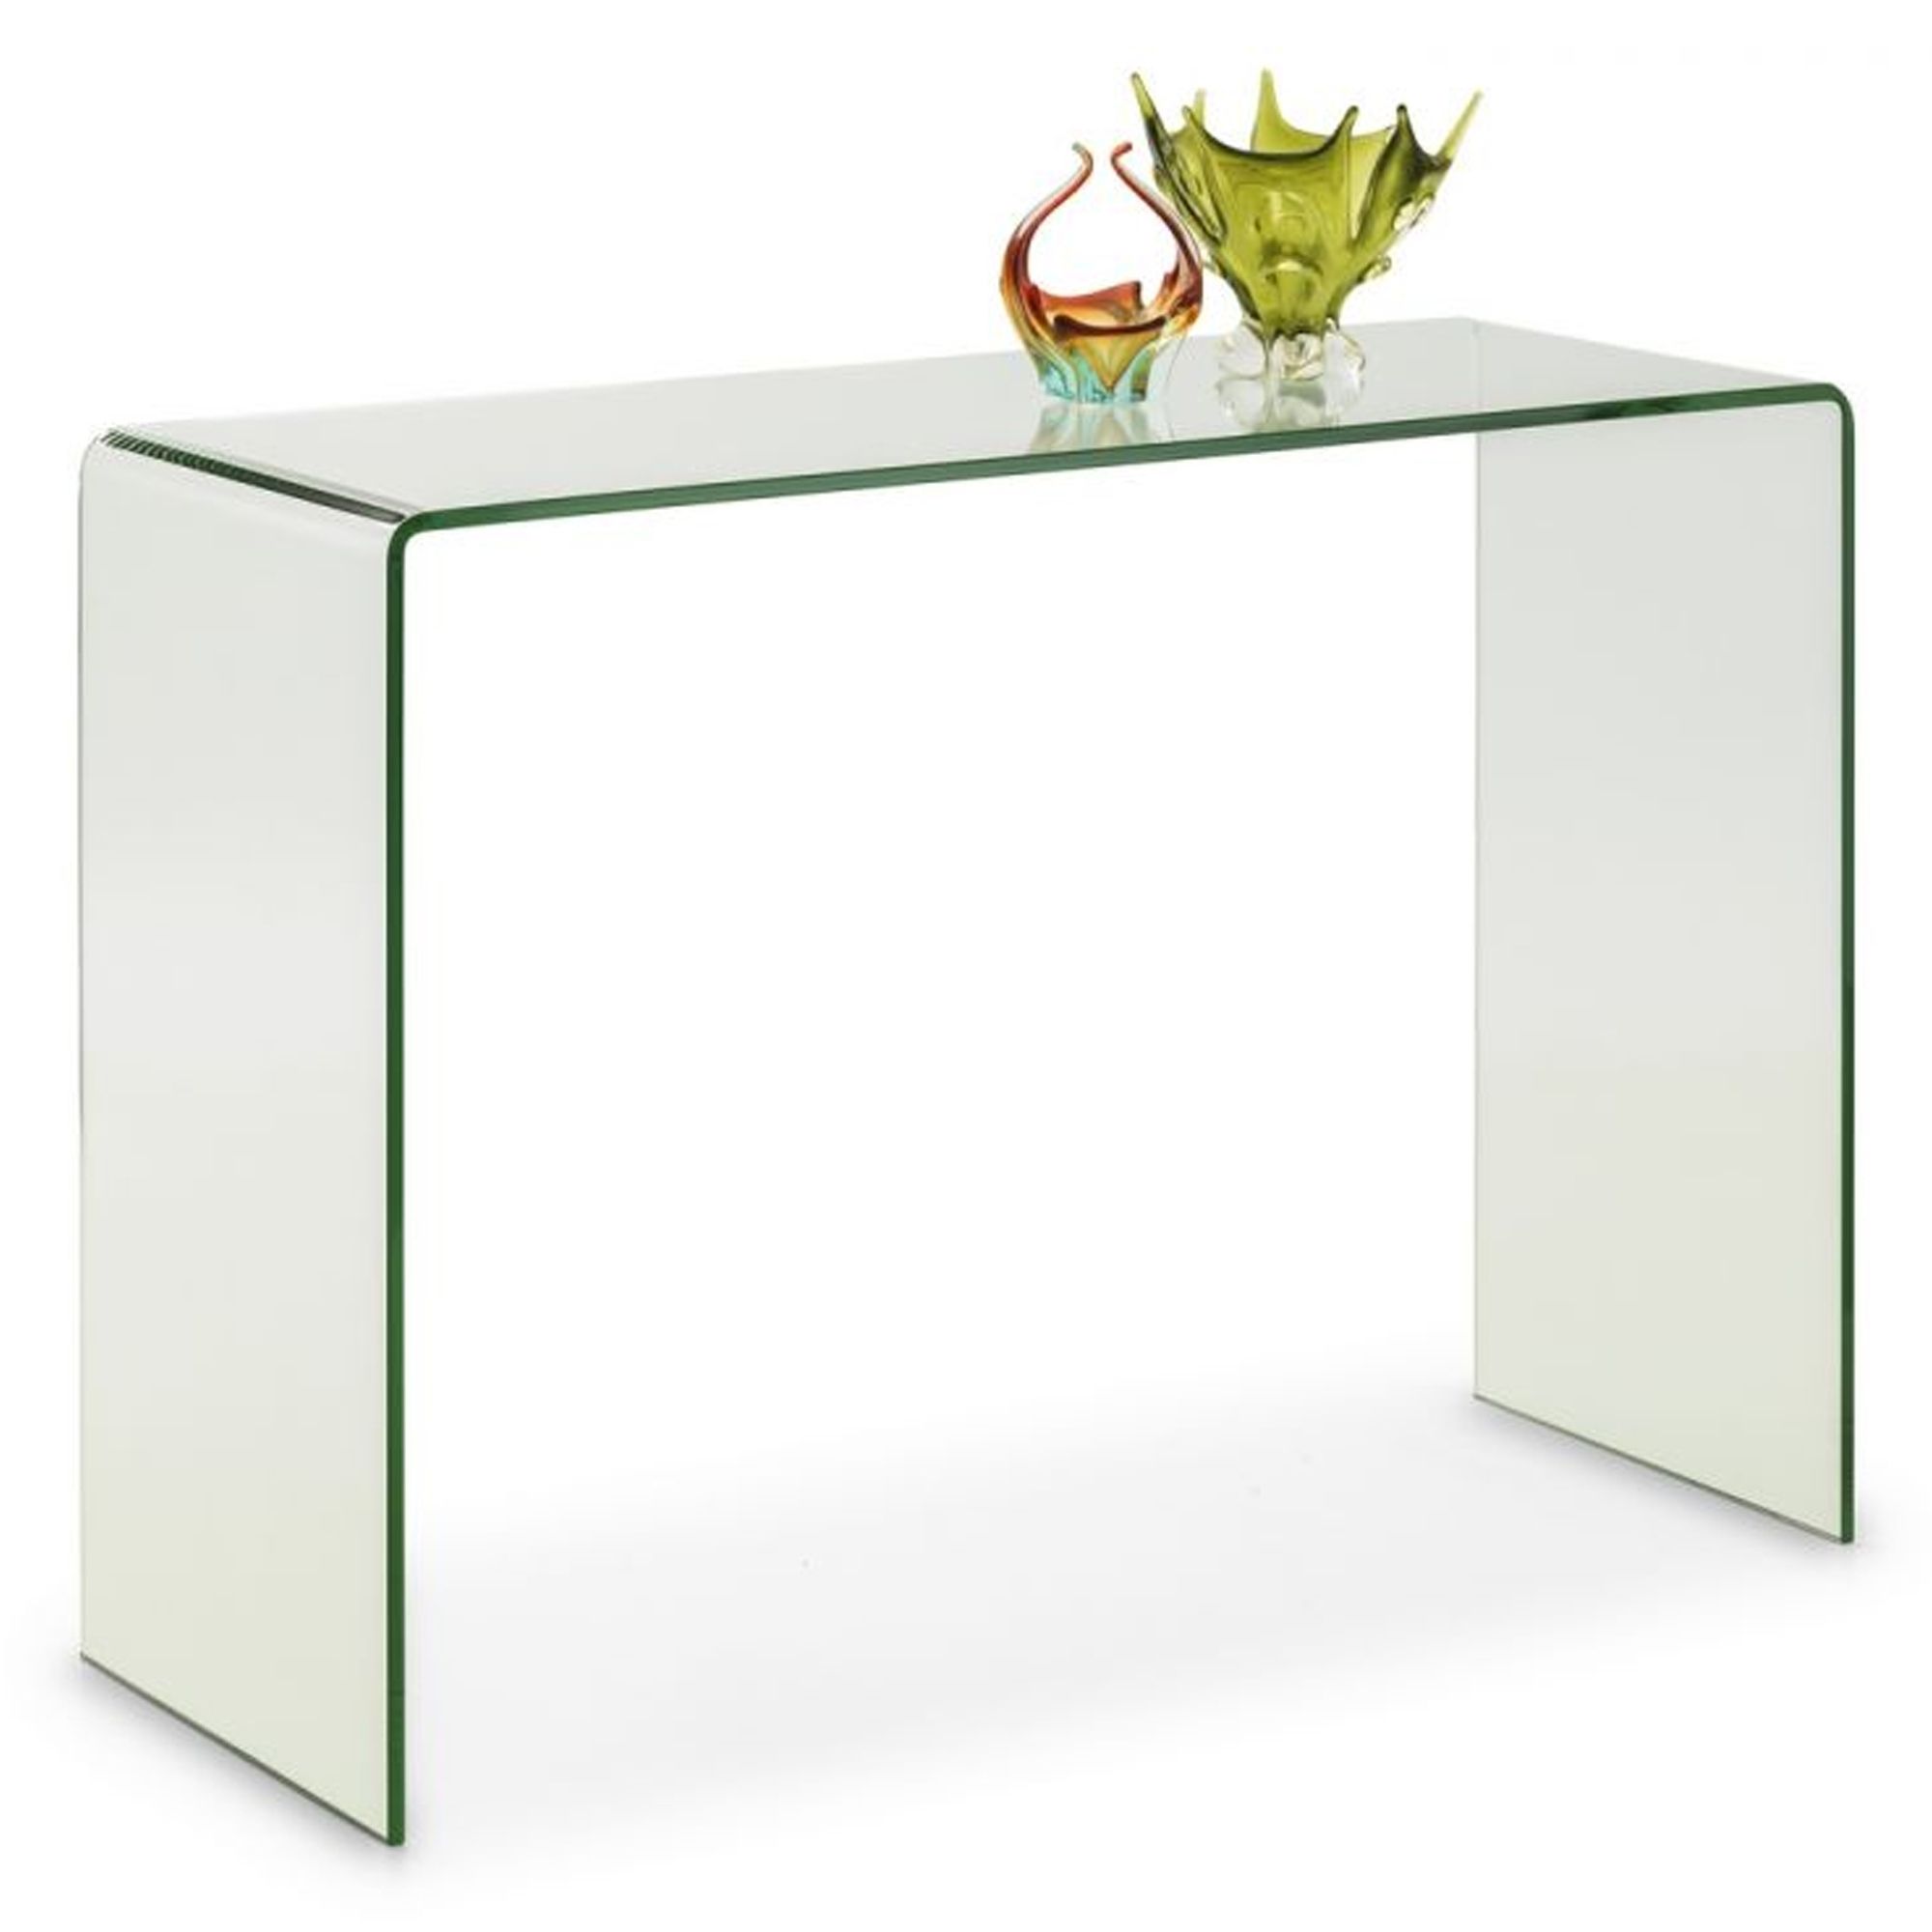 Amalfi Bent Glass Console Table | Modern & Contemporary Console Tables Intended For Glass Console Tables (View 20 of 20)